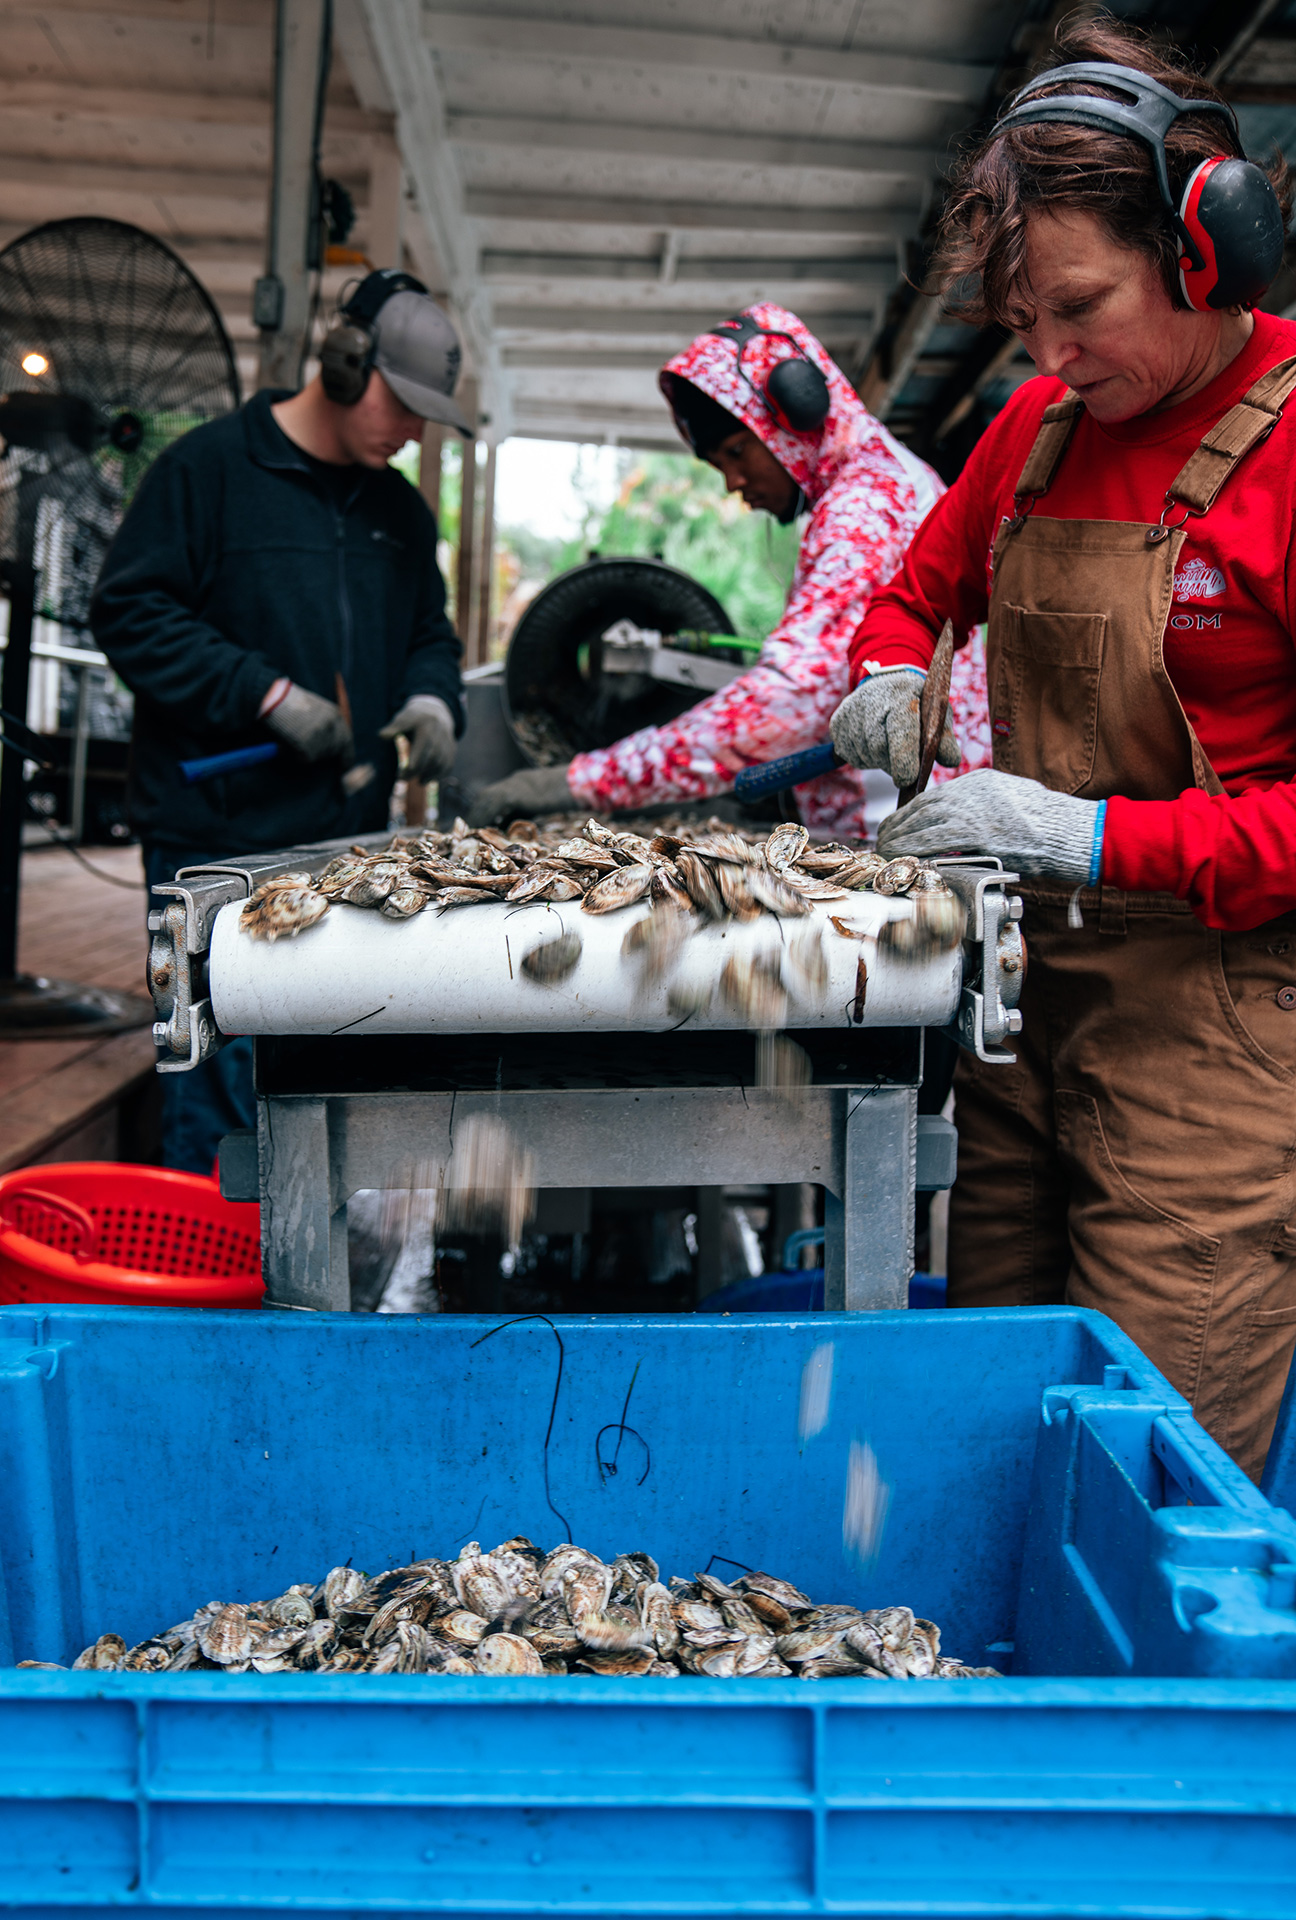 Oysters pulled out of the water are sent through the tumbler to get rid of growth on the shells. Buildup on the oyster shells needs to be broken off with tools as they go down the conveyor belt. Tumbling the oysters helps strengthen the shells and makes deeper cups in the oyster.